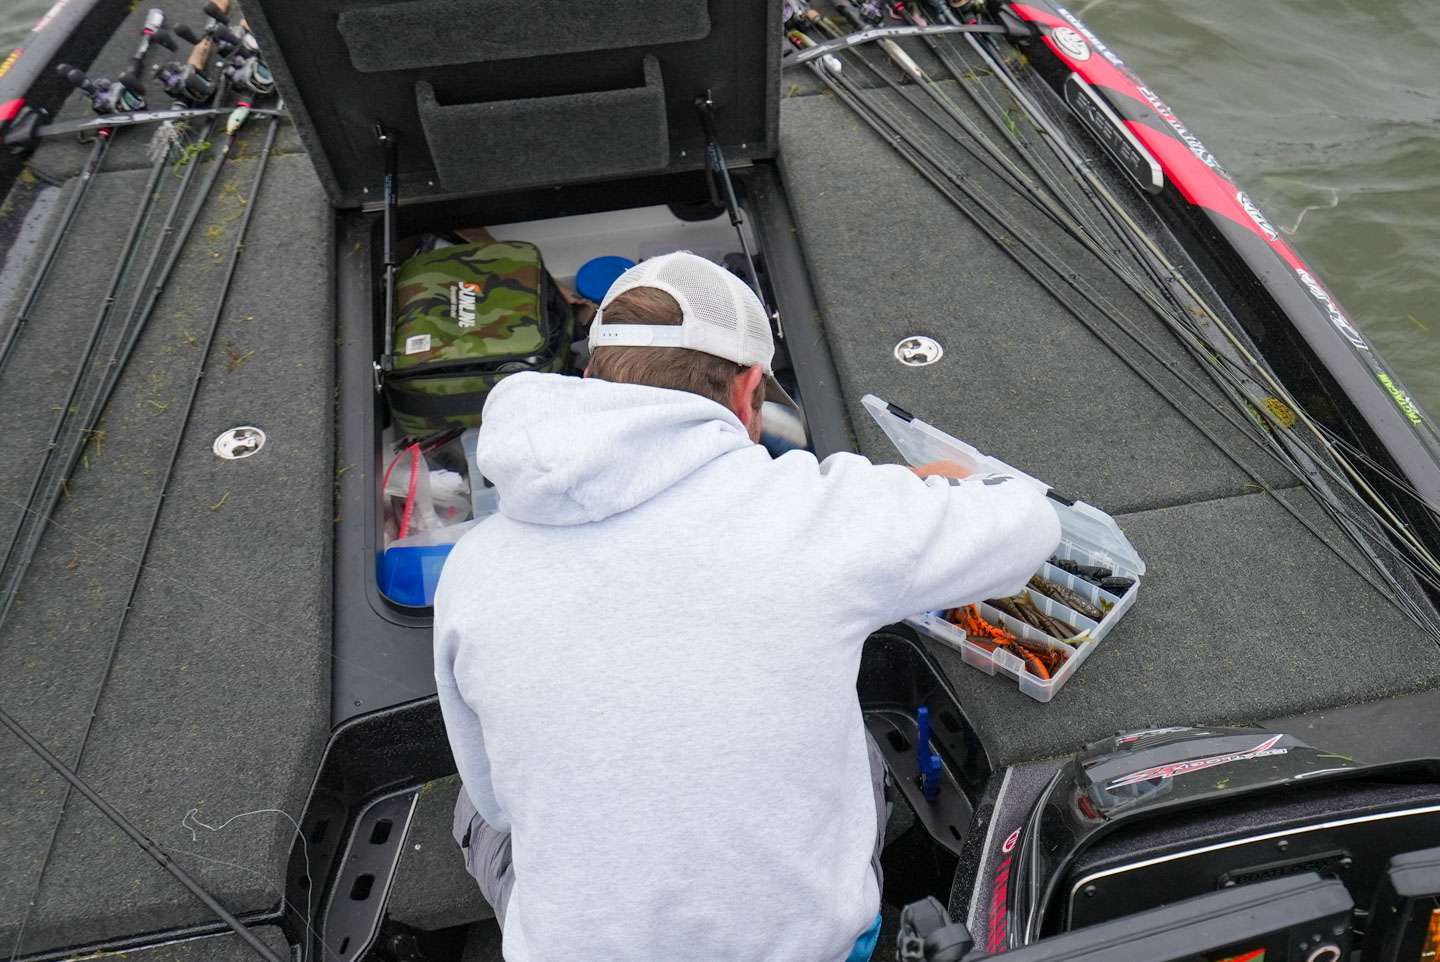 Logan digs around in his Skeeter FXR to get his lure rigged up. 